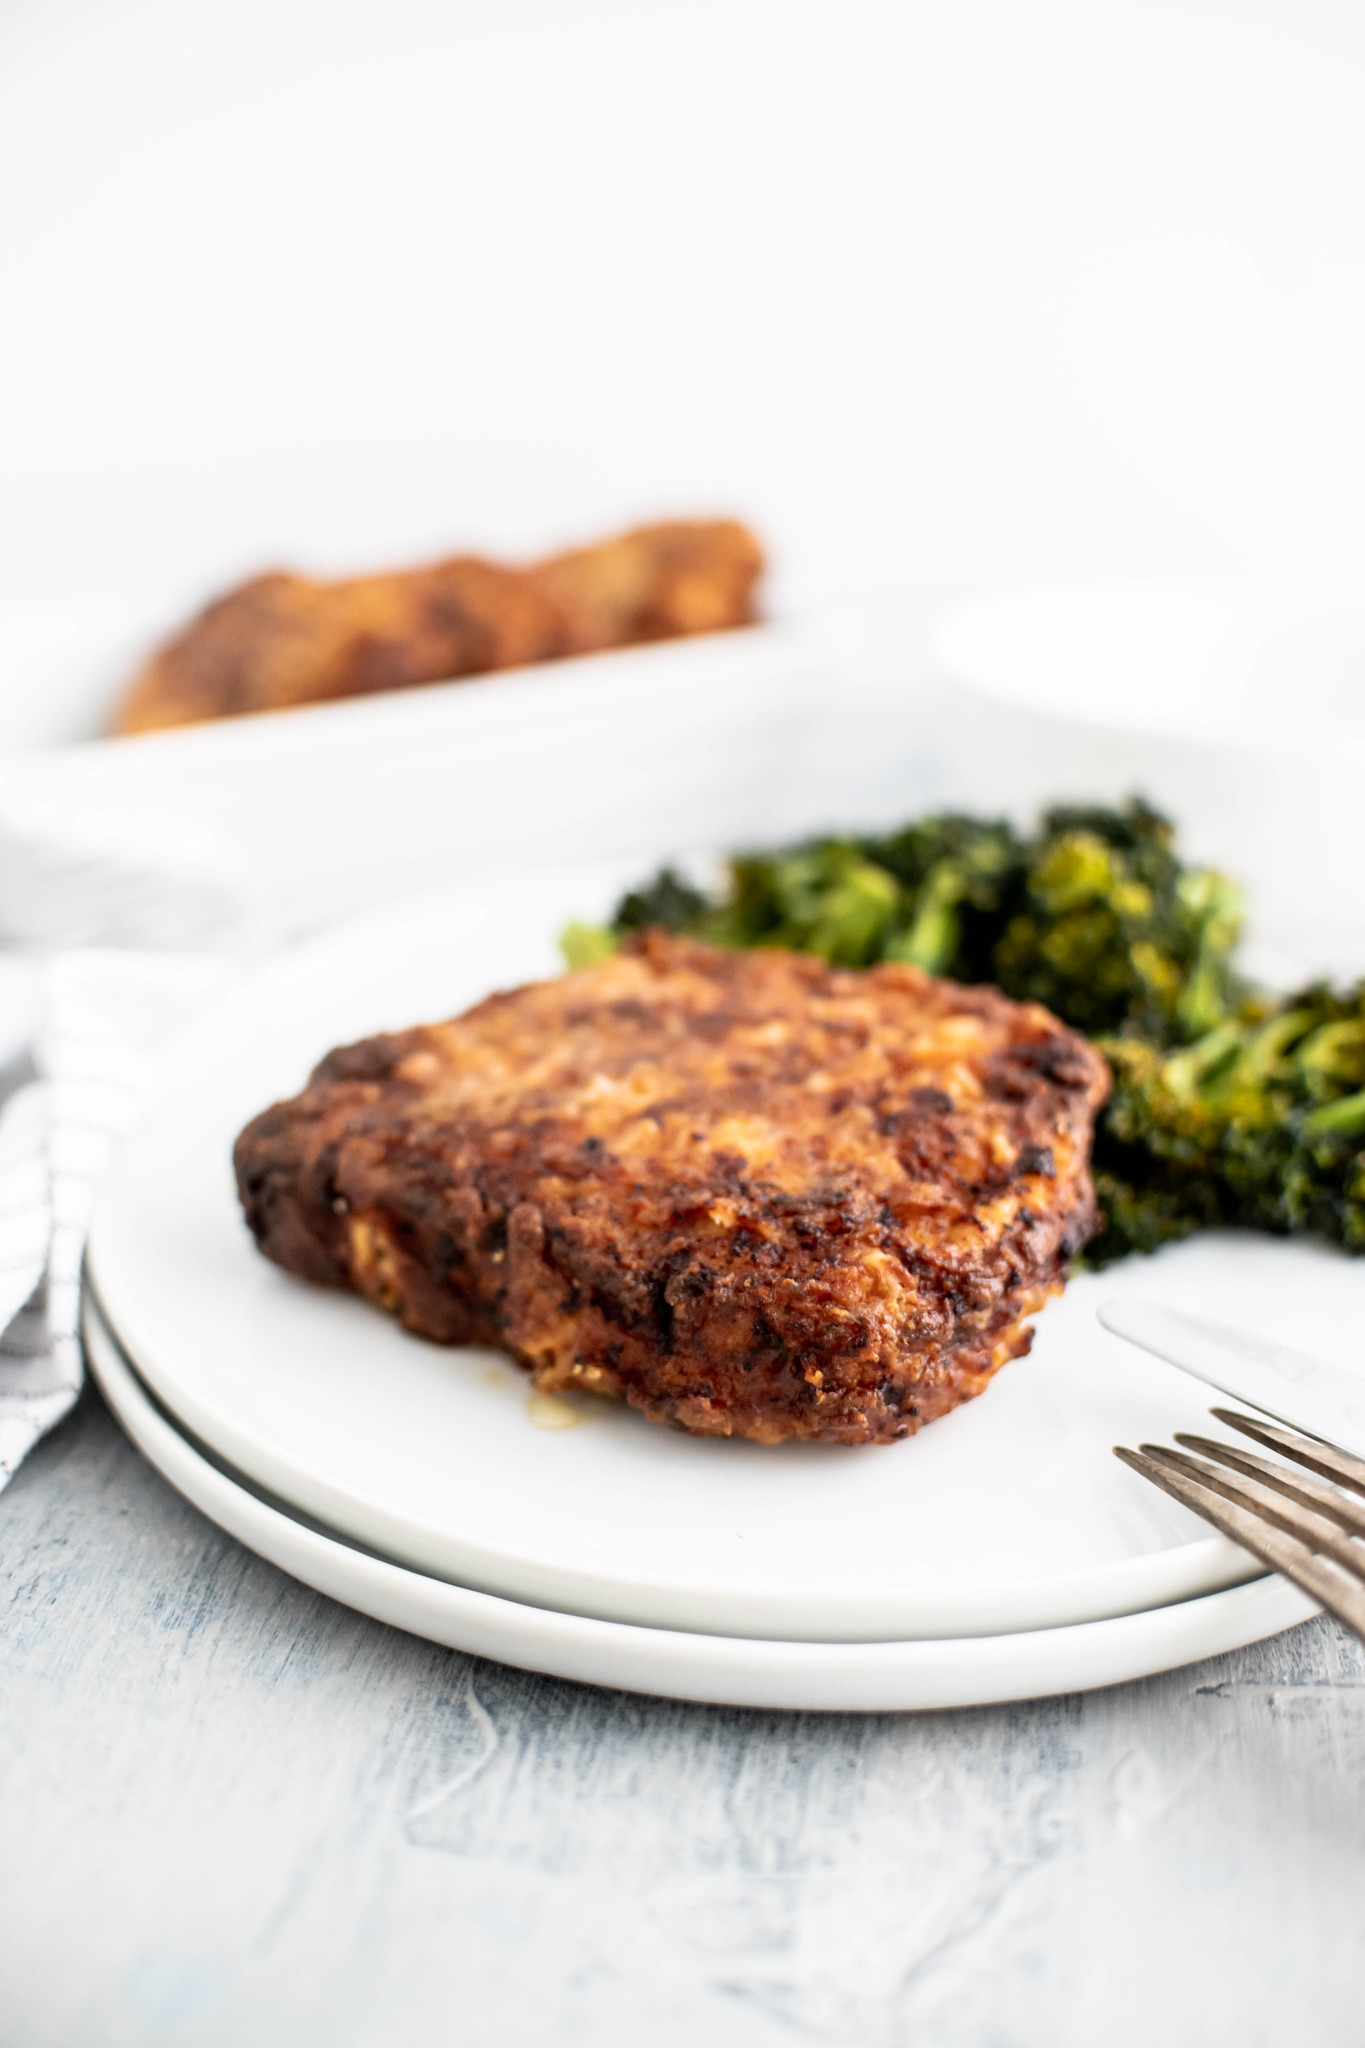 Fried pork chop and roasted broccoli on a white round plate.